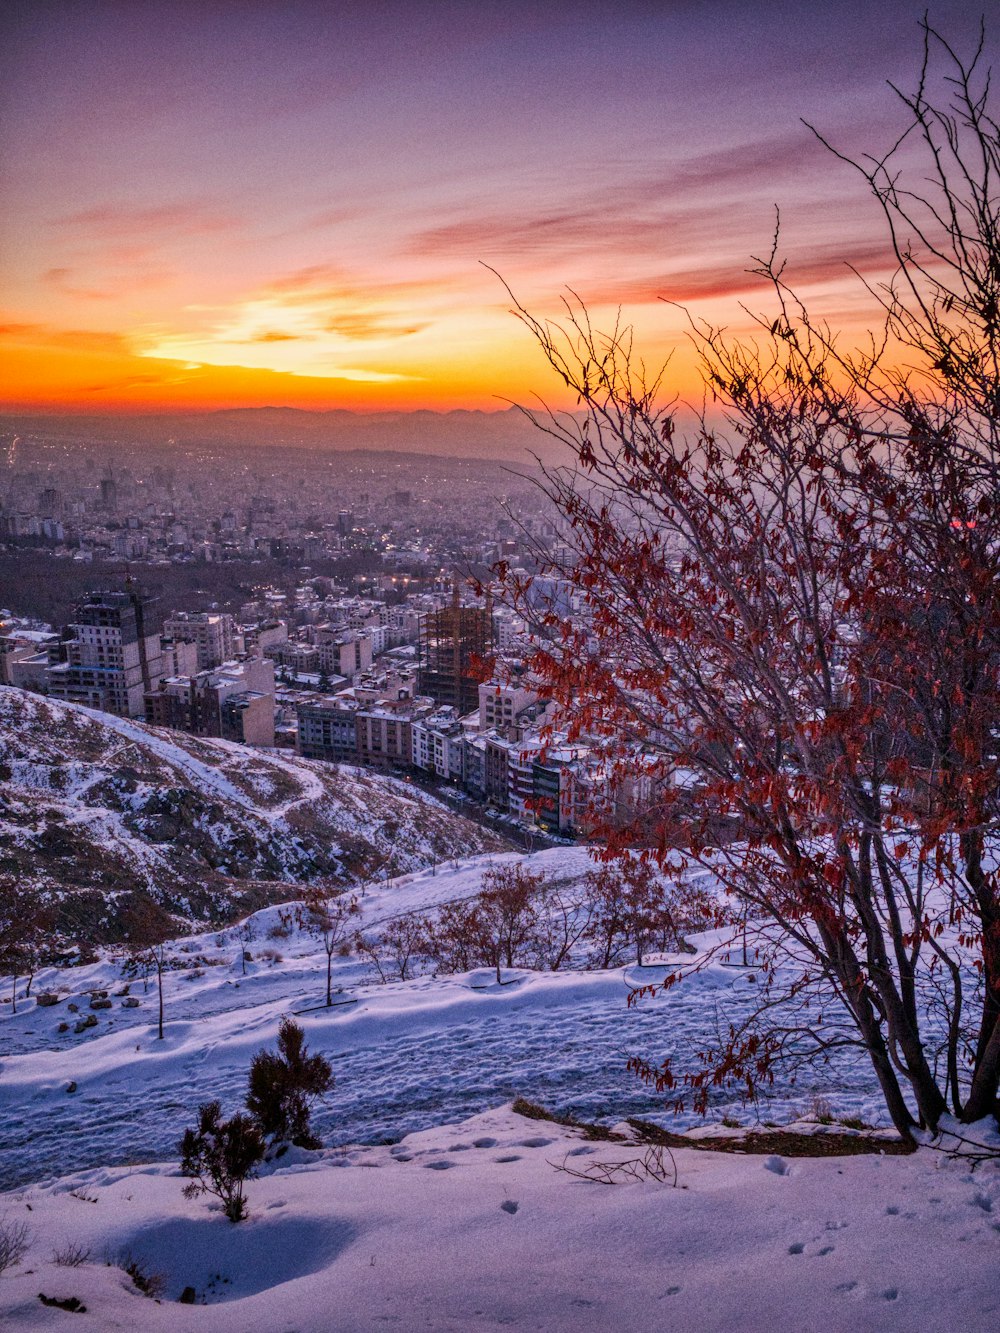 tree on snow-covered mountain with view of cityscape